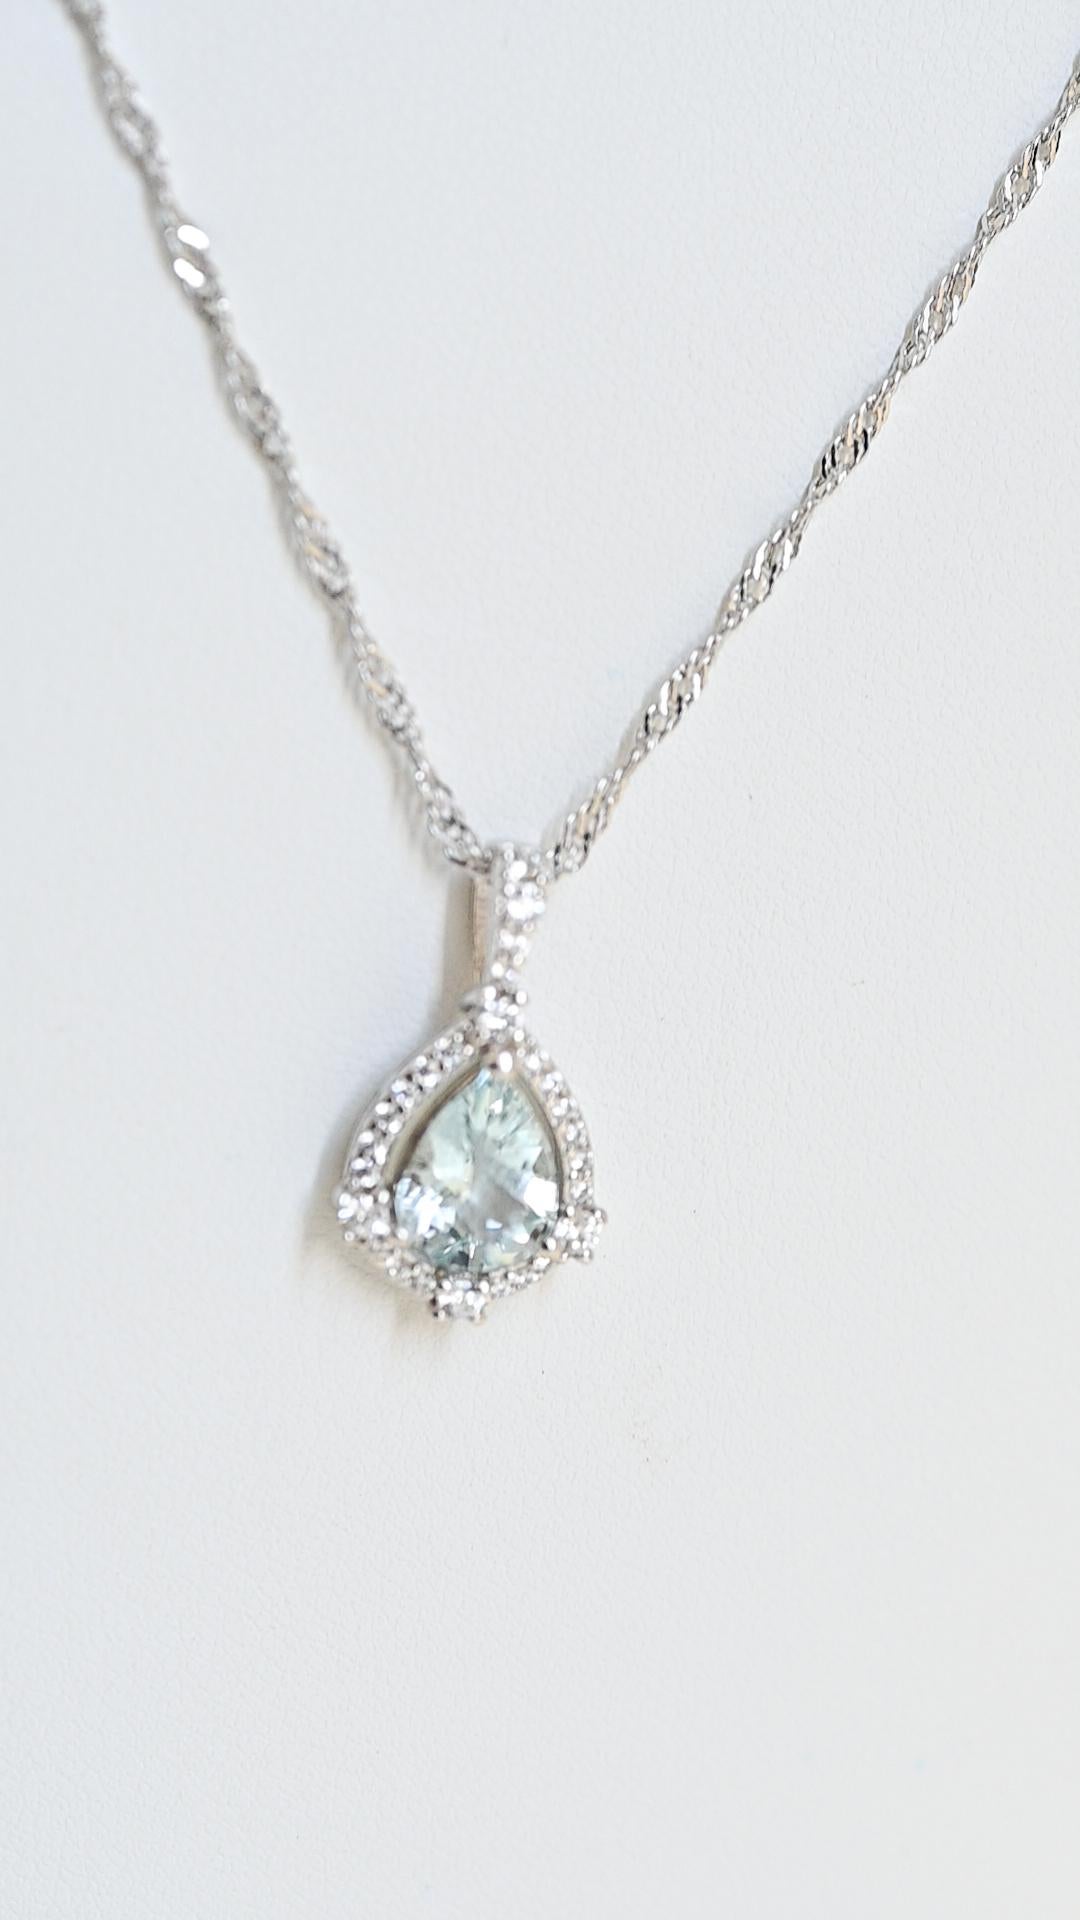 Pear Cut 2.10 Cts Aquamarine Bridal Wedding Pendant Necklace Sterling Silver Jewelry  For Sale